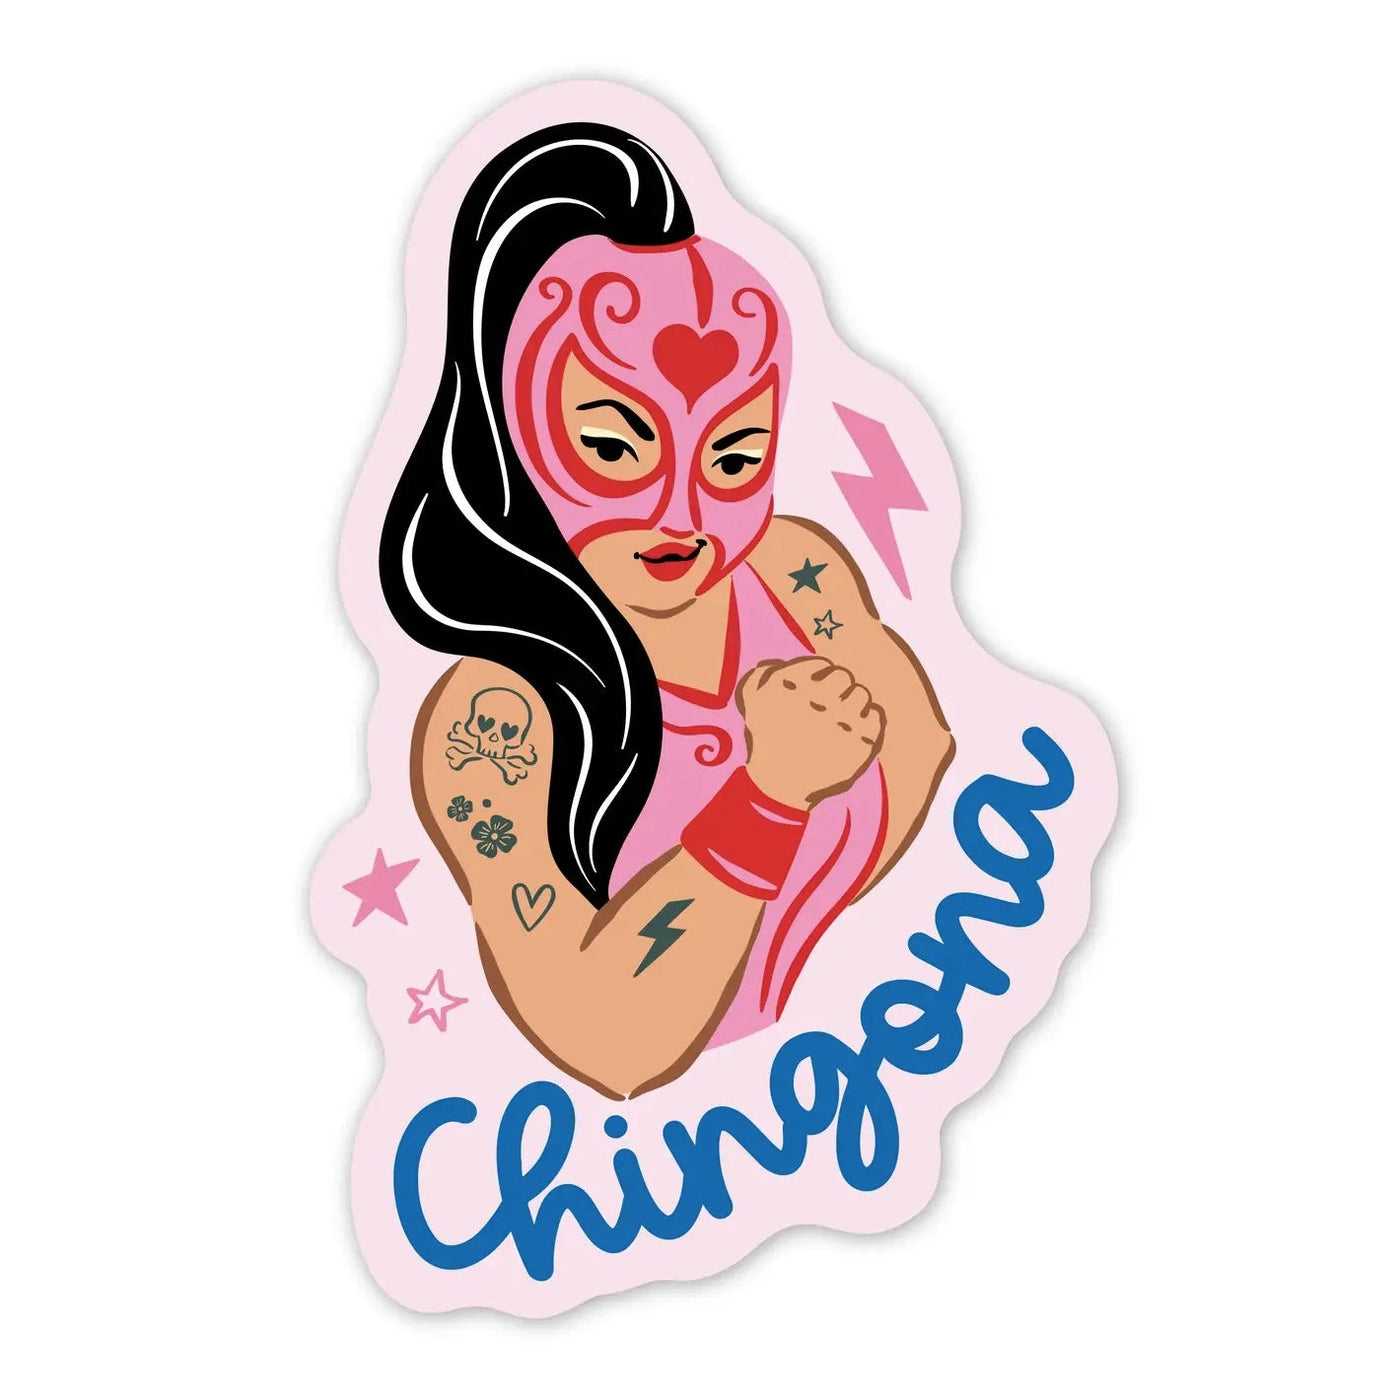 blush sticker with an illustration of a woman luchadora with a pink suit and mask featuring the word Chingona in blue lettering